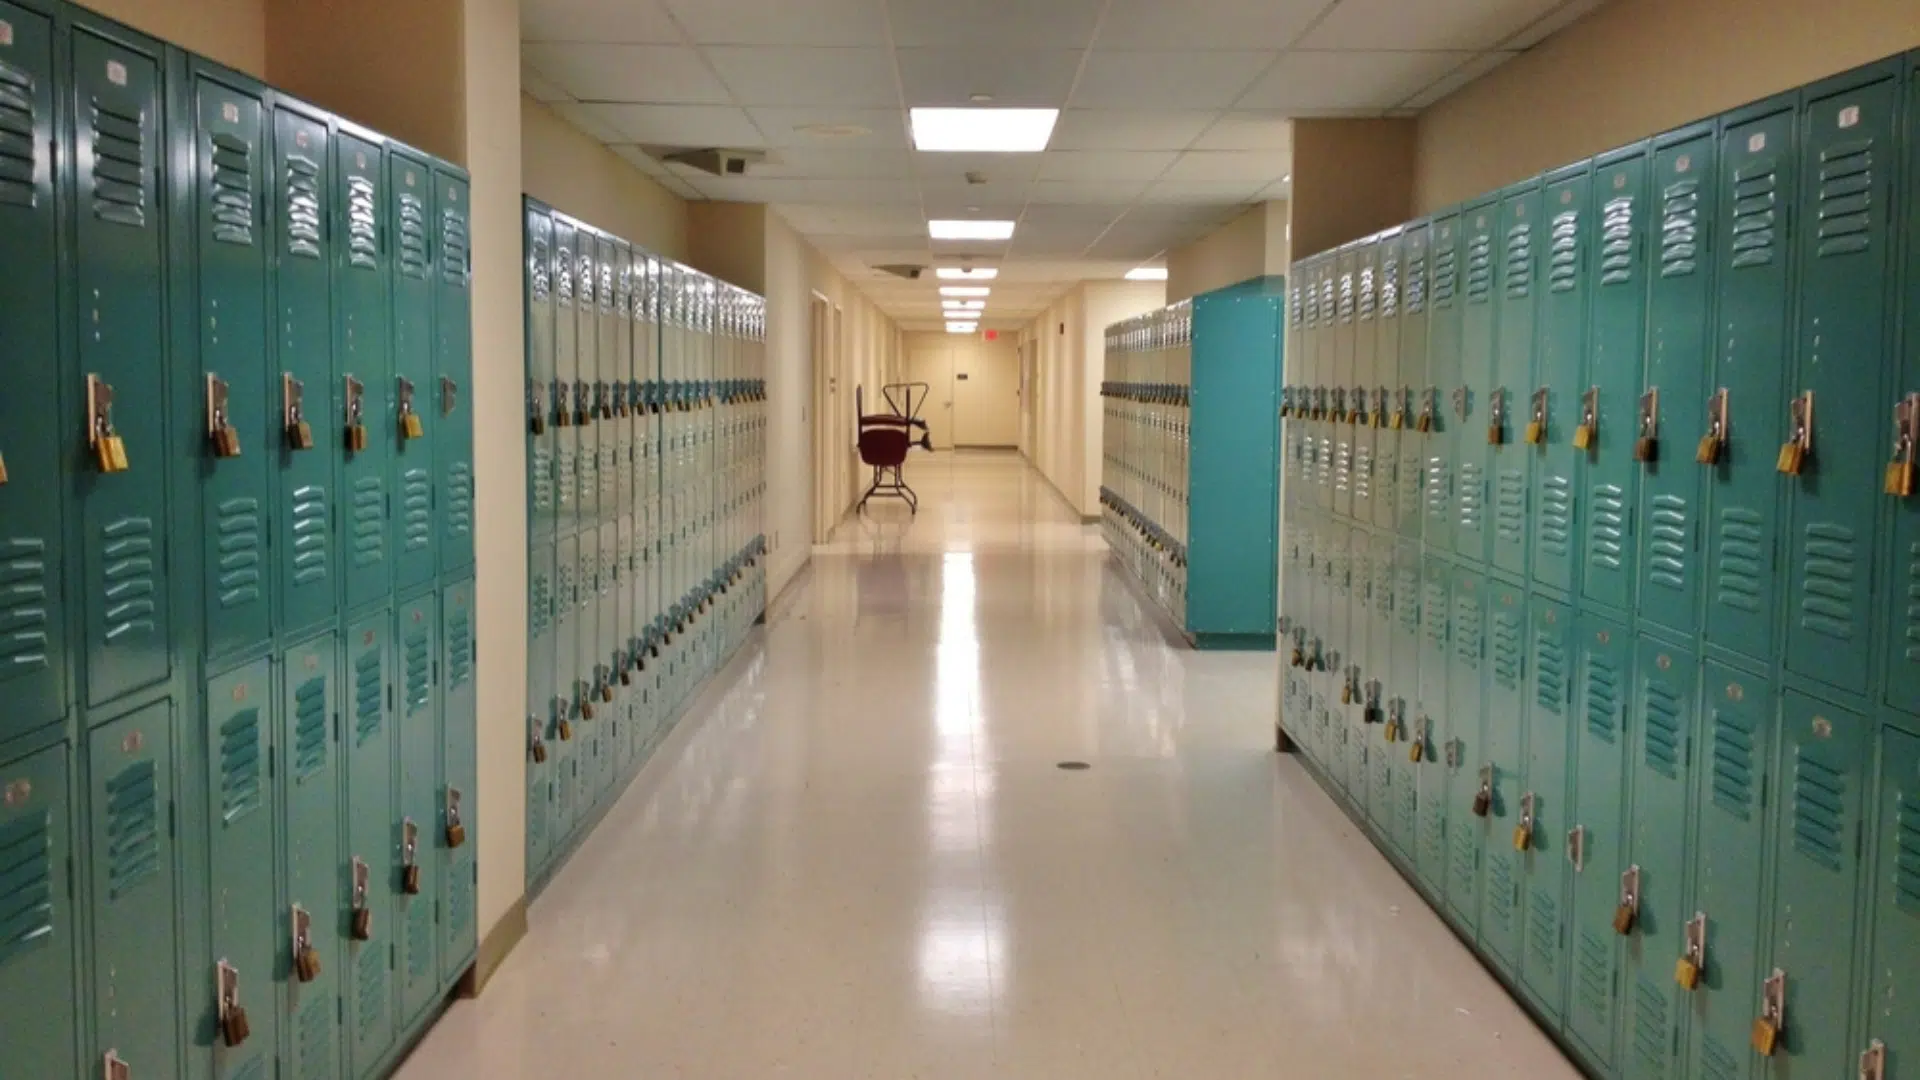 An empty school hallway filled with turquoise lockers.